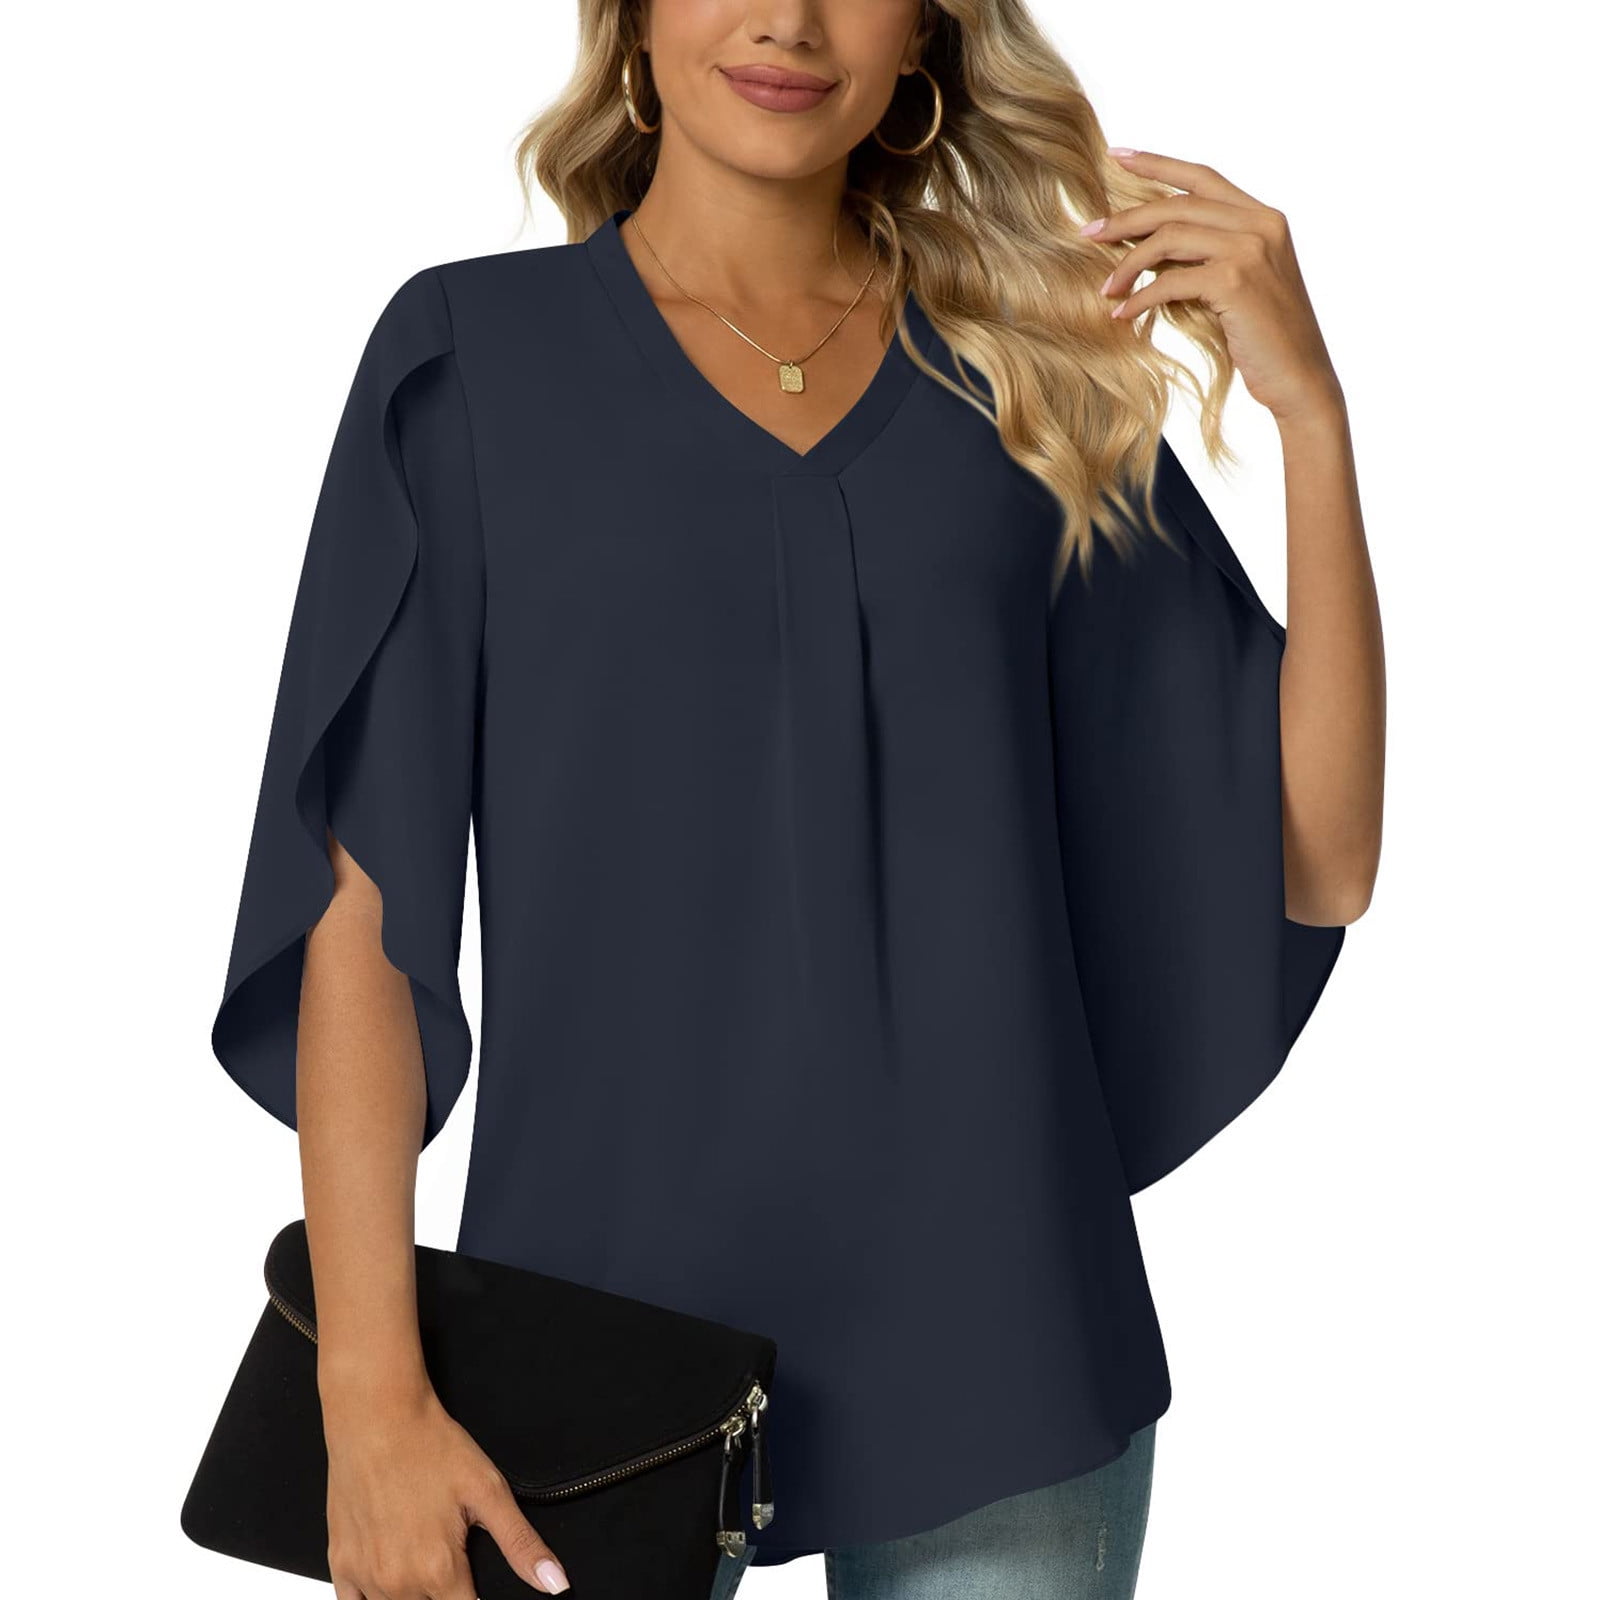 Usmixi Cute Tops for Women Elbow-Length V-Neck Solid T shirts Summer Casual  Lightweight Loose Fit Comfy Chiffon Blouse Navy L Clearance Clothes 